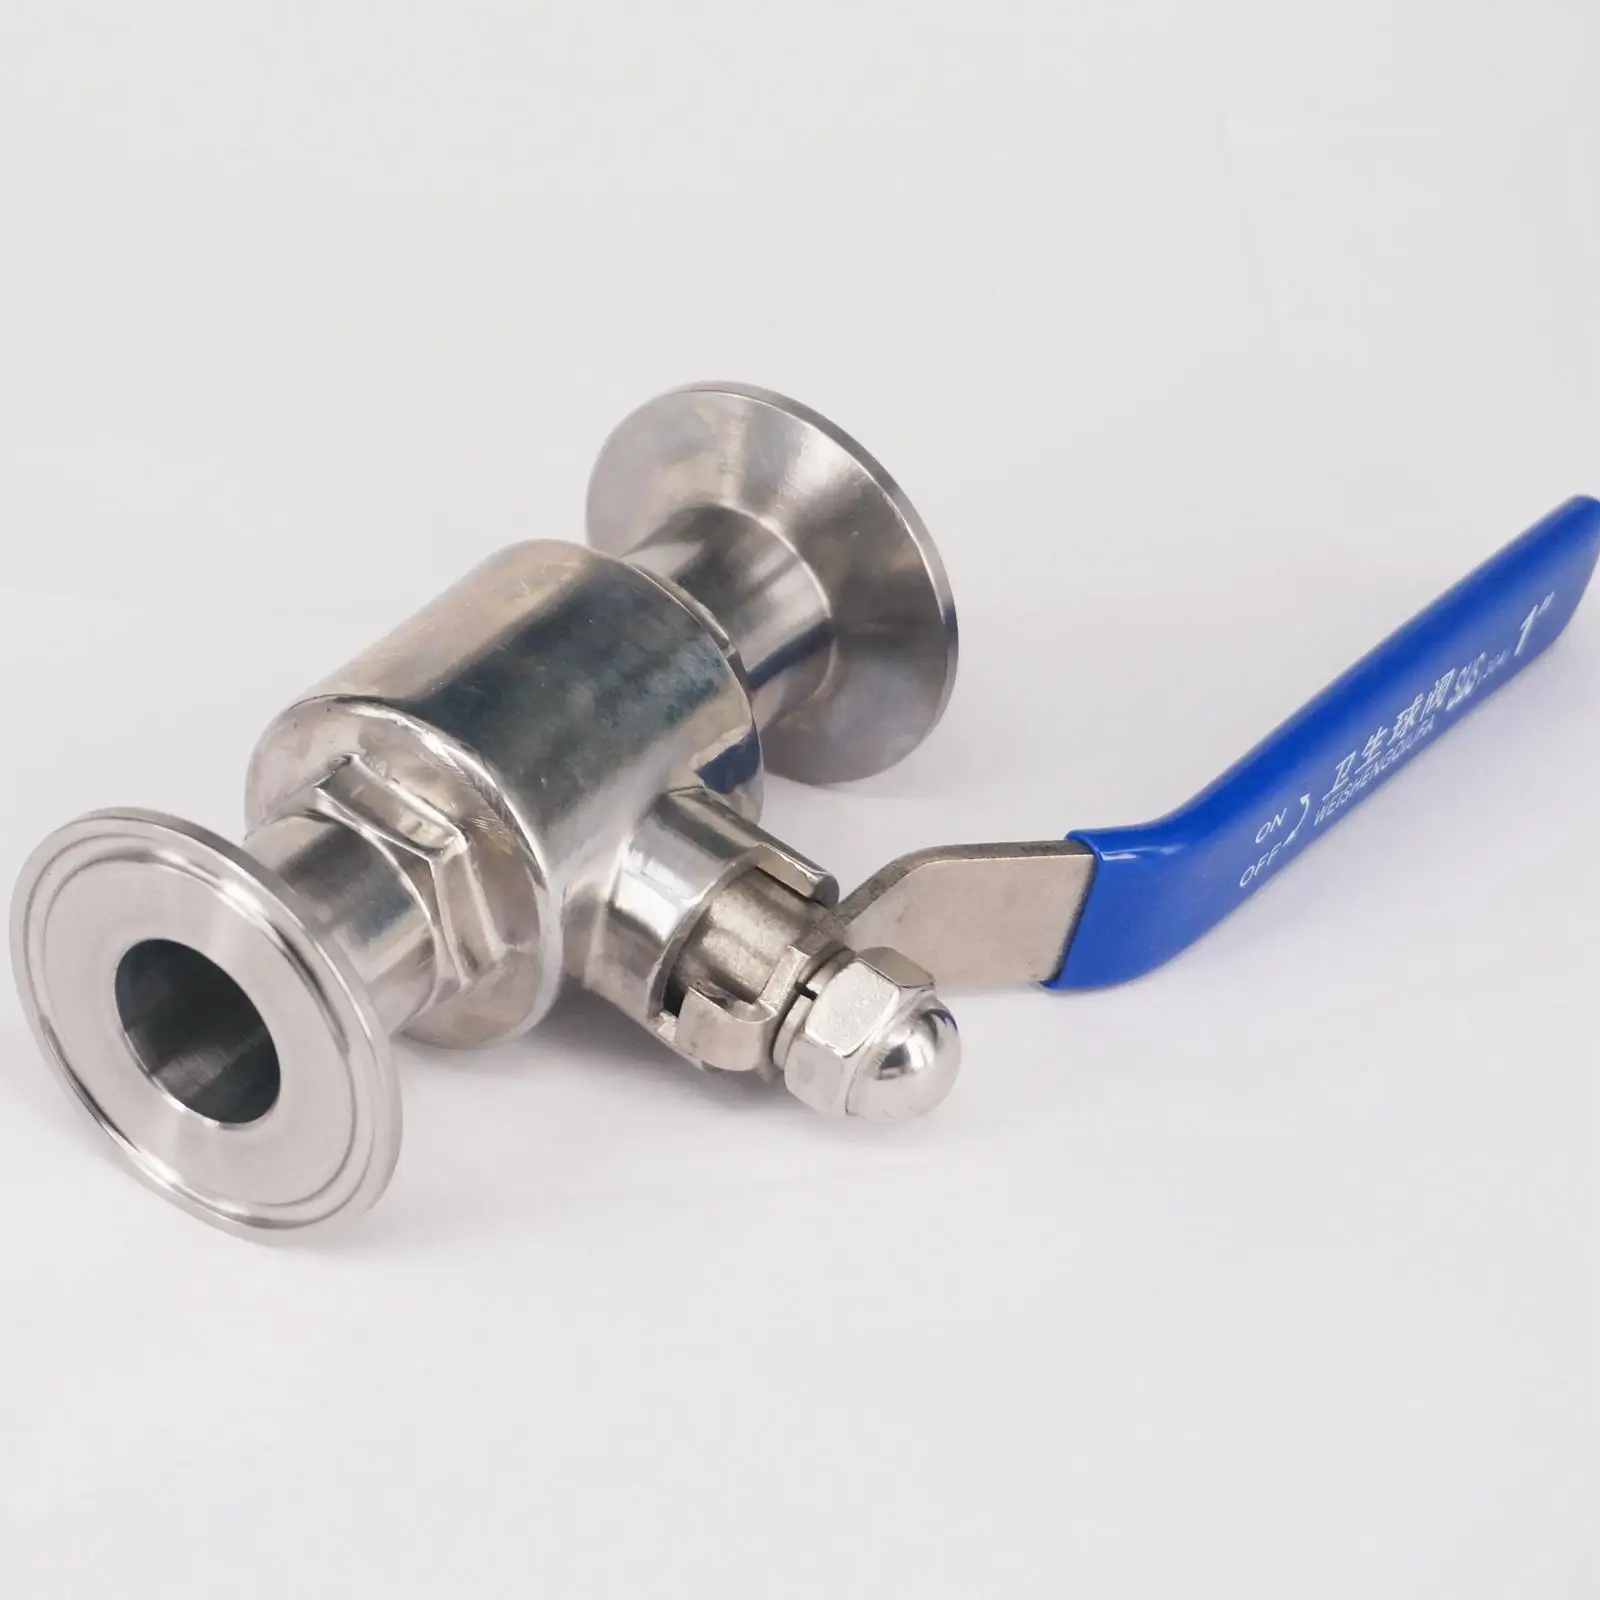 Specification : 1 CHENTAOMAYAN 1 38mm50.5MM 304 Stainless Steel Sanitary Ball Valve Tri Clamp Ferrule Type for Homebrew Diary Product 